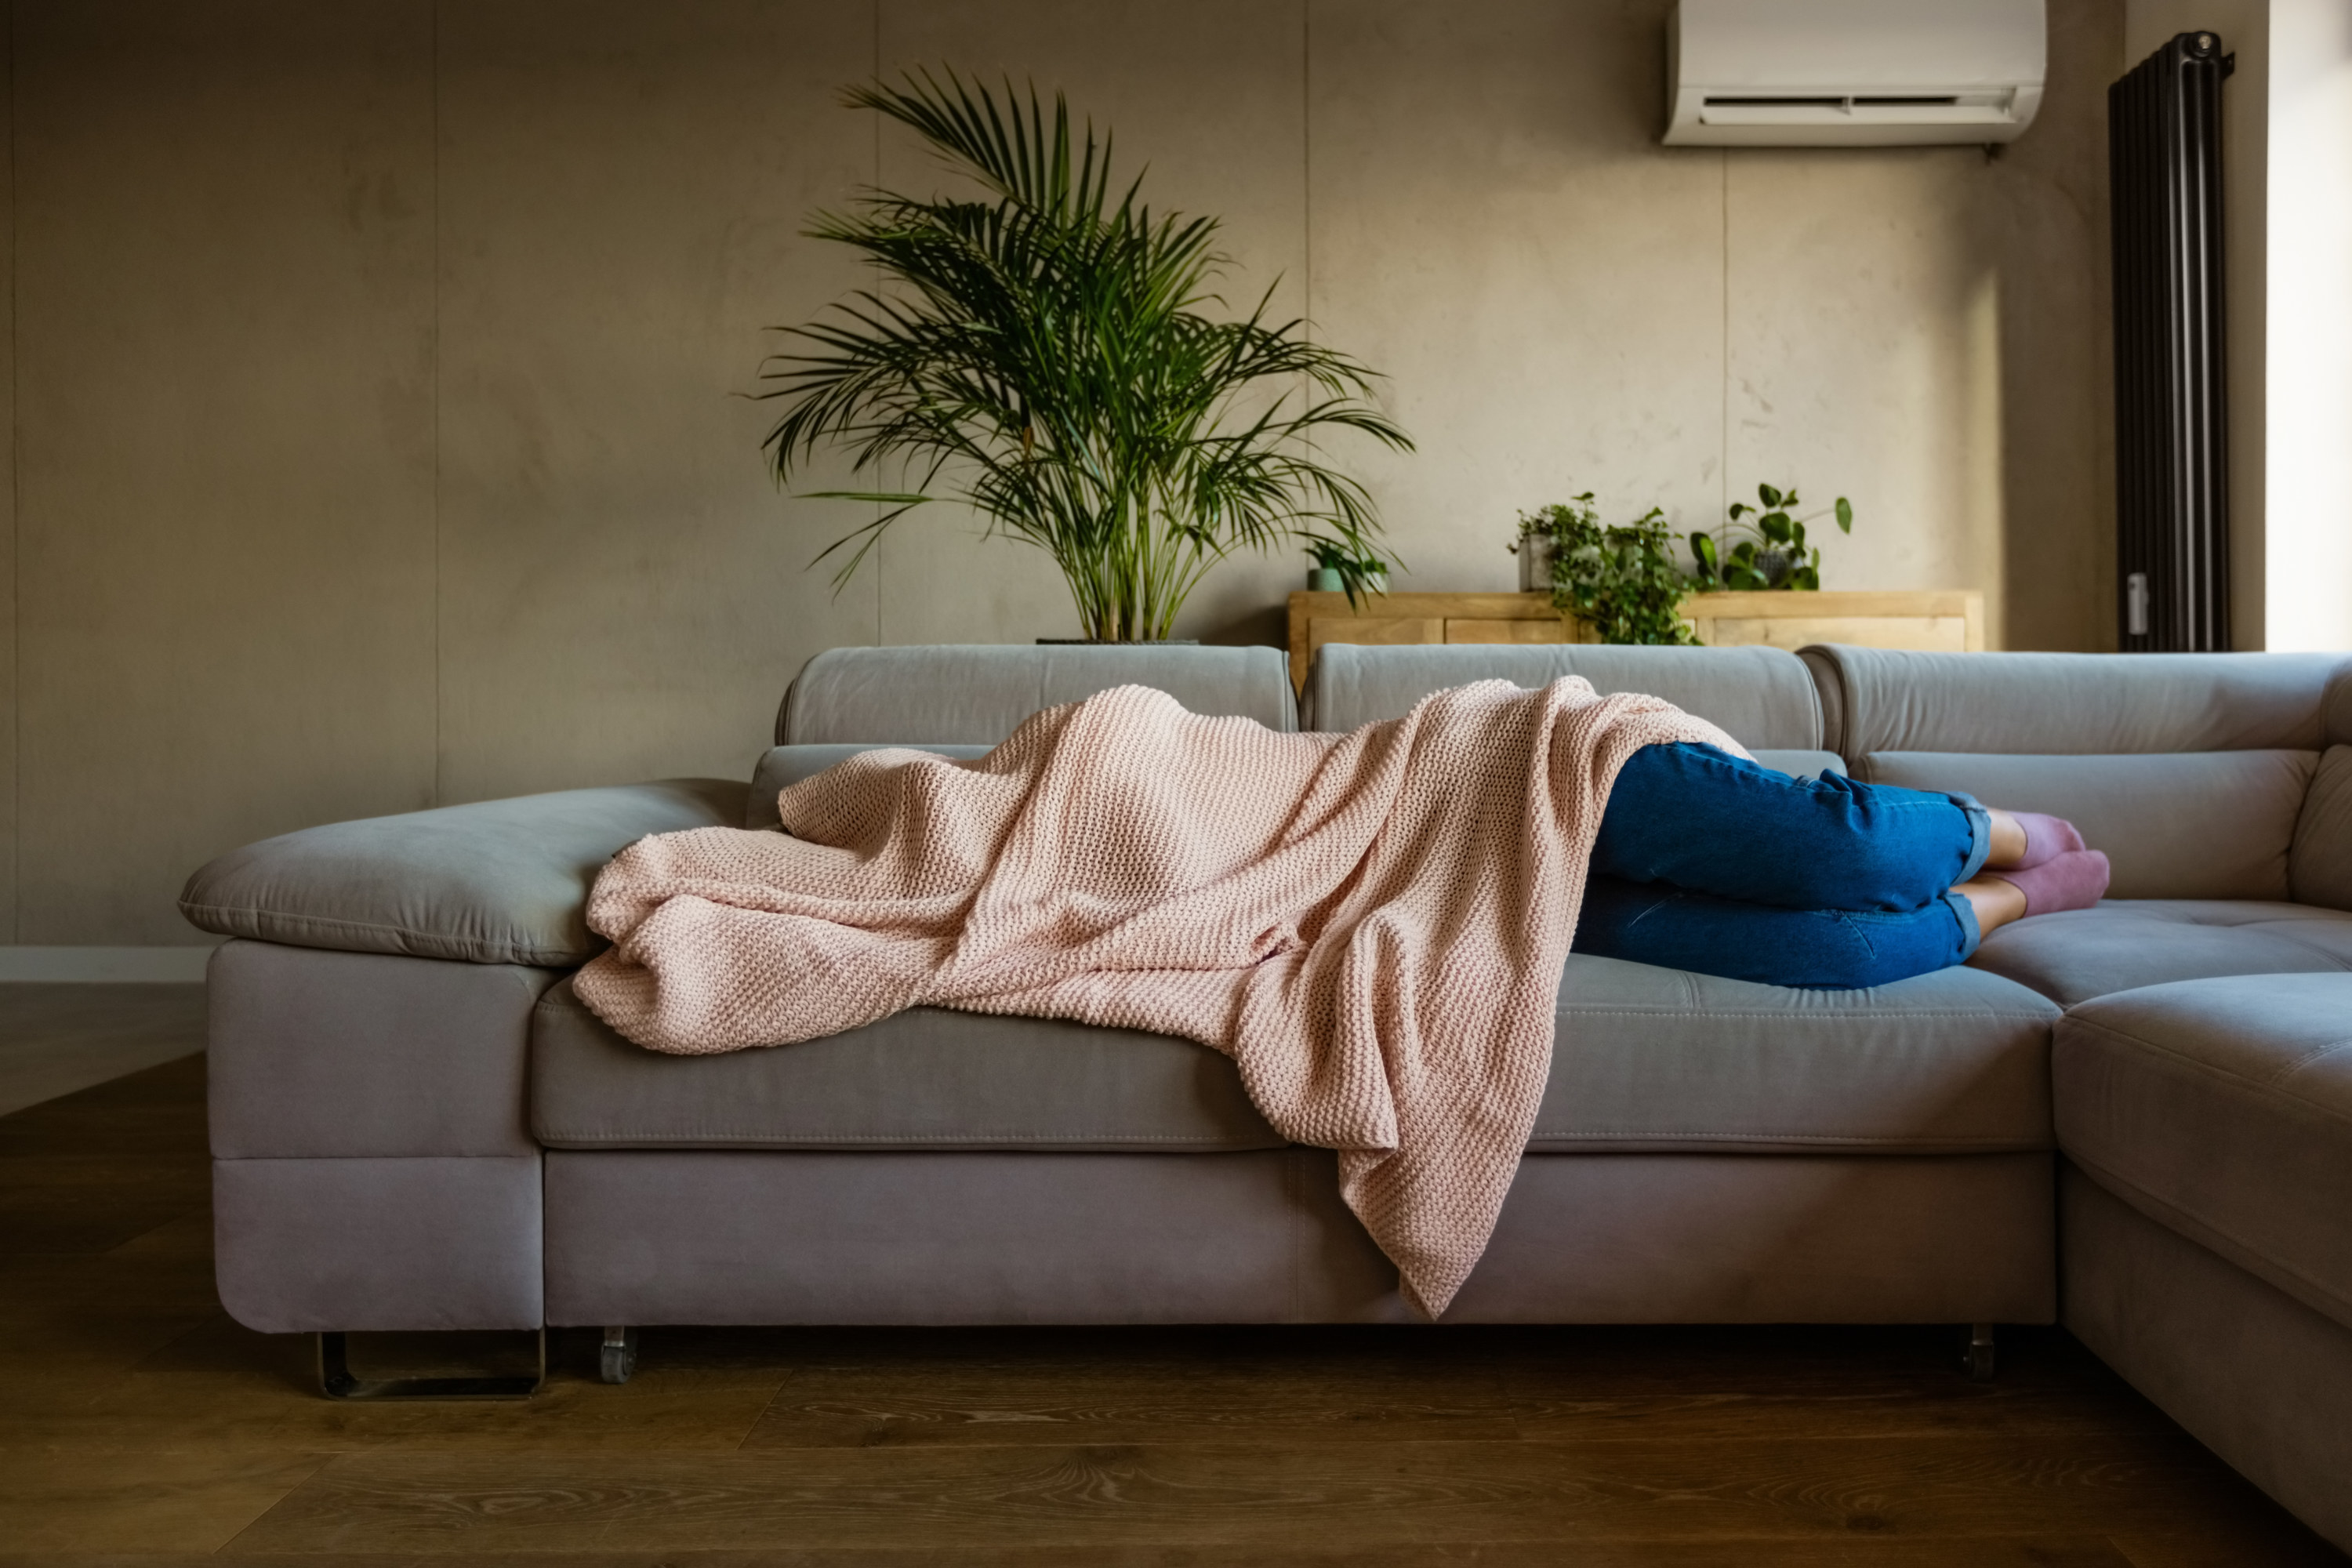 A person lying on a couch under a blanket with just their legs sticking out